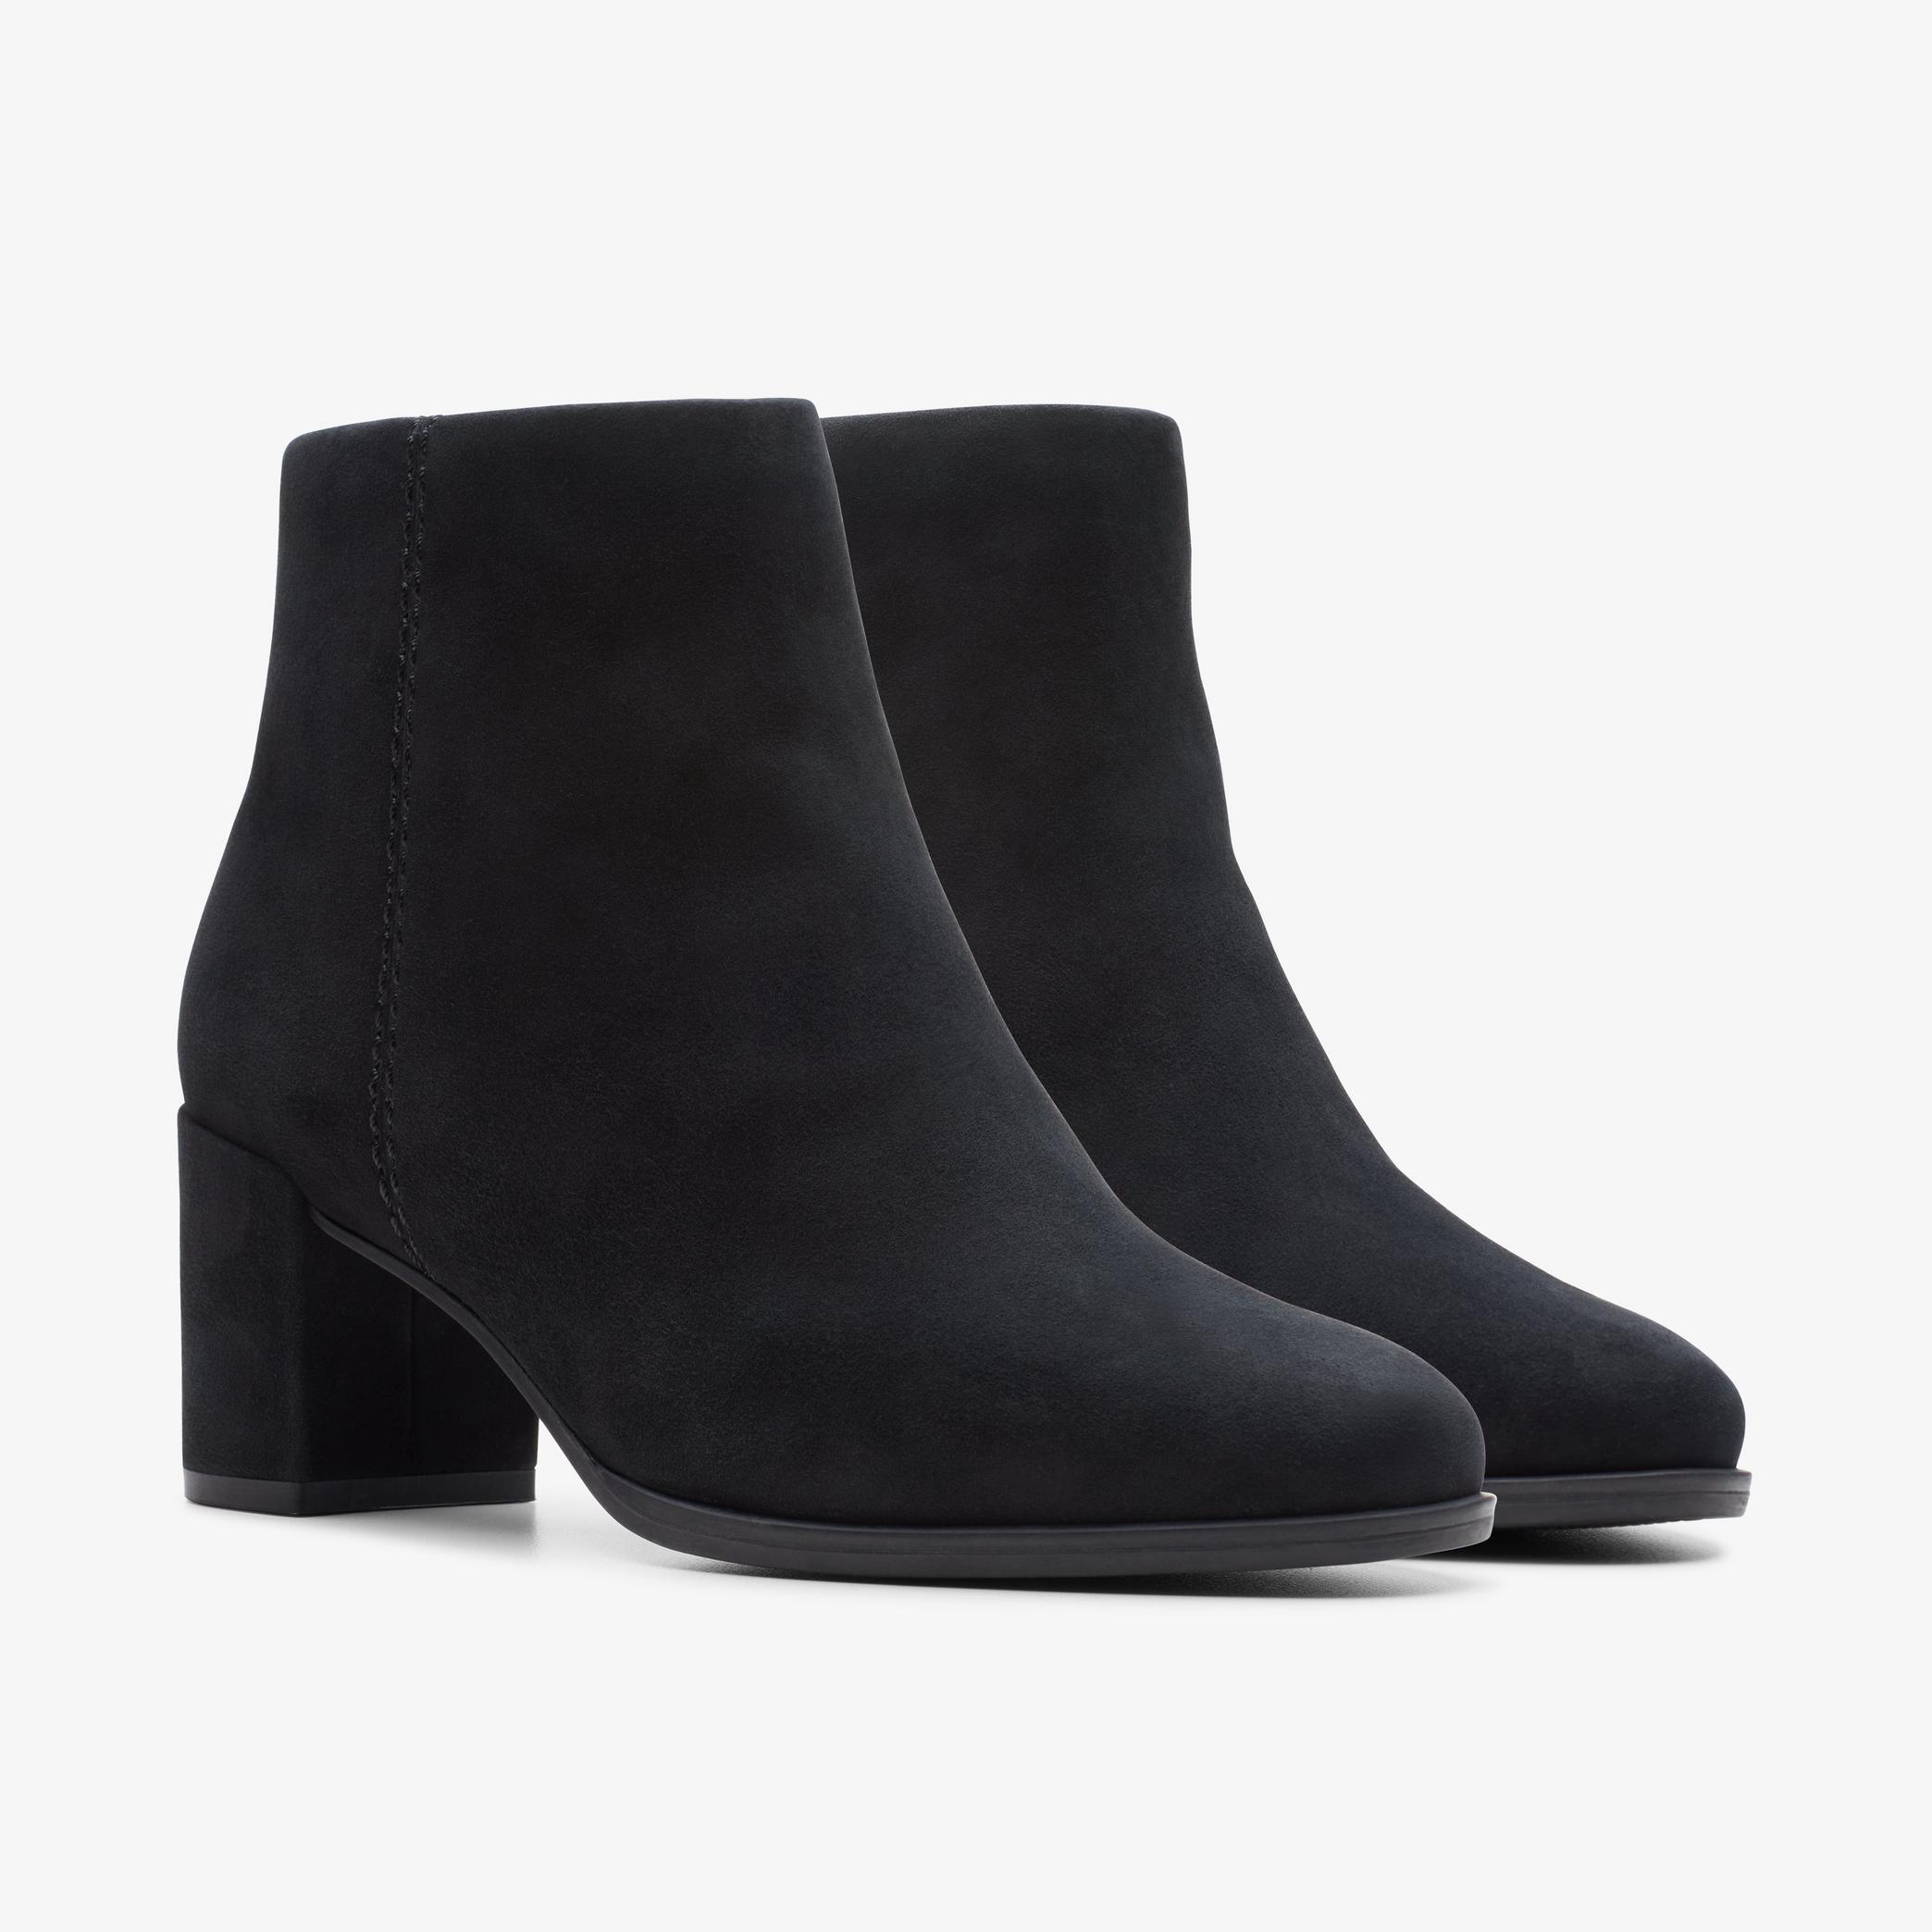 Freva55 Zip Black Suede Ankle Boots, view 5 of 7